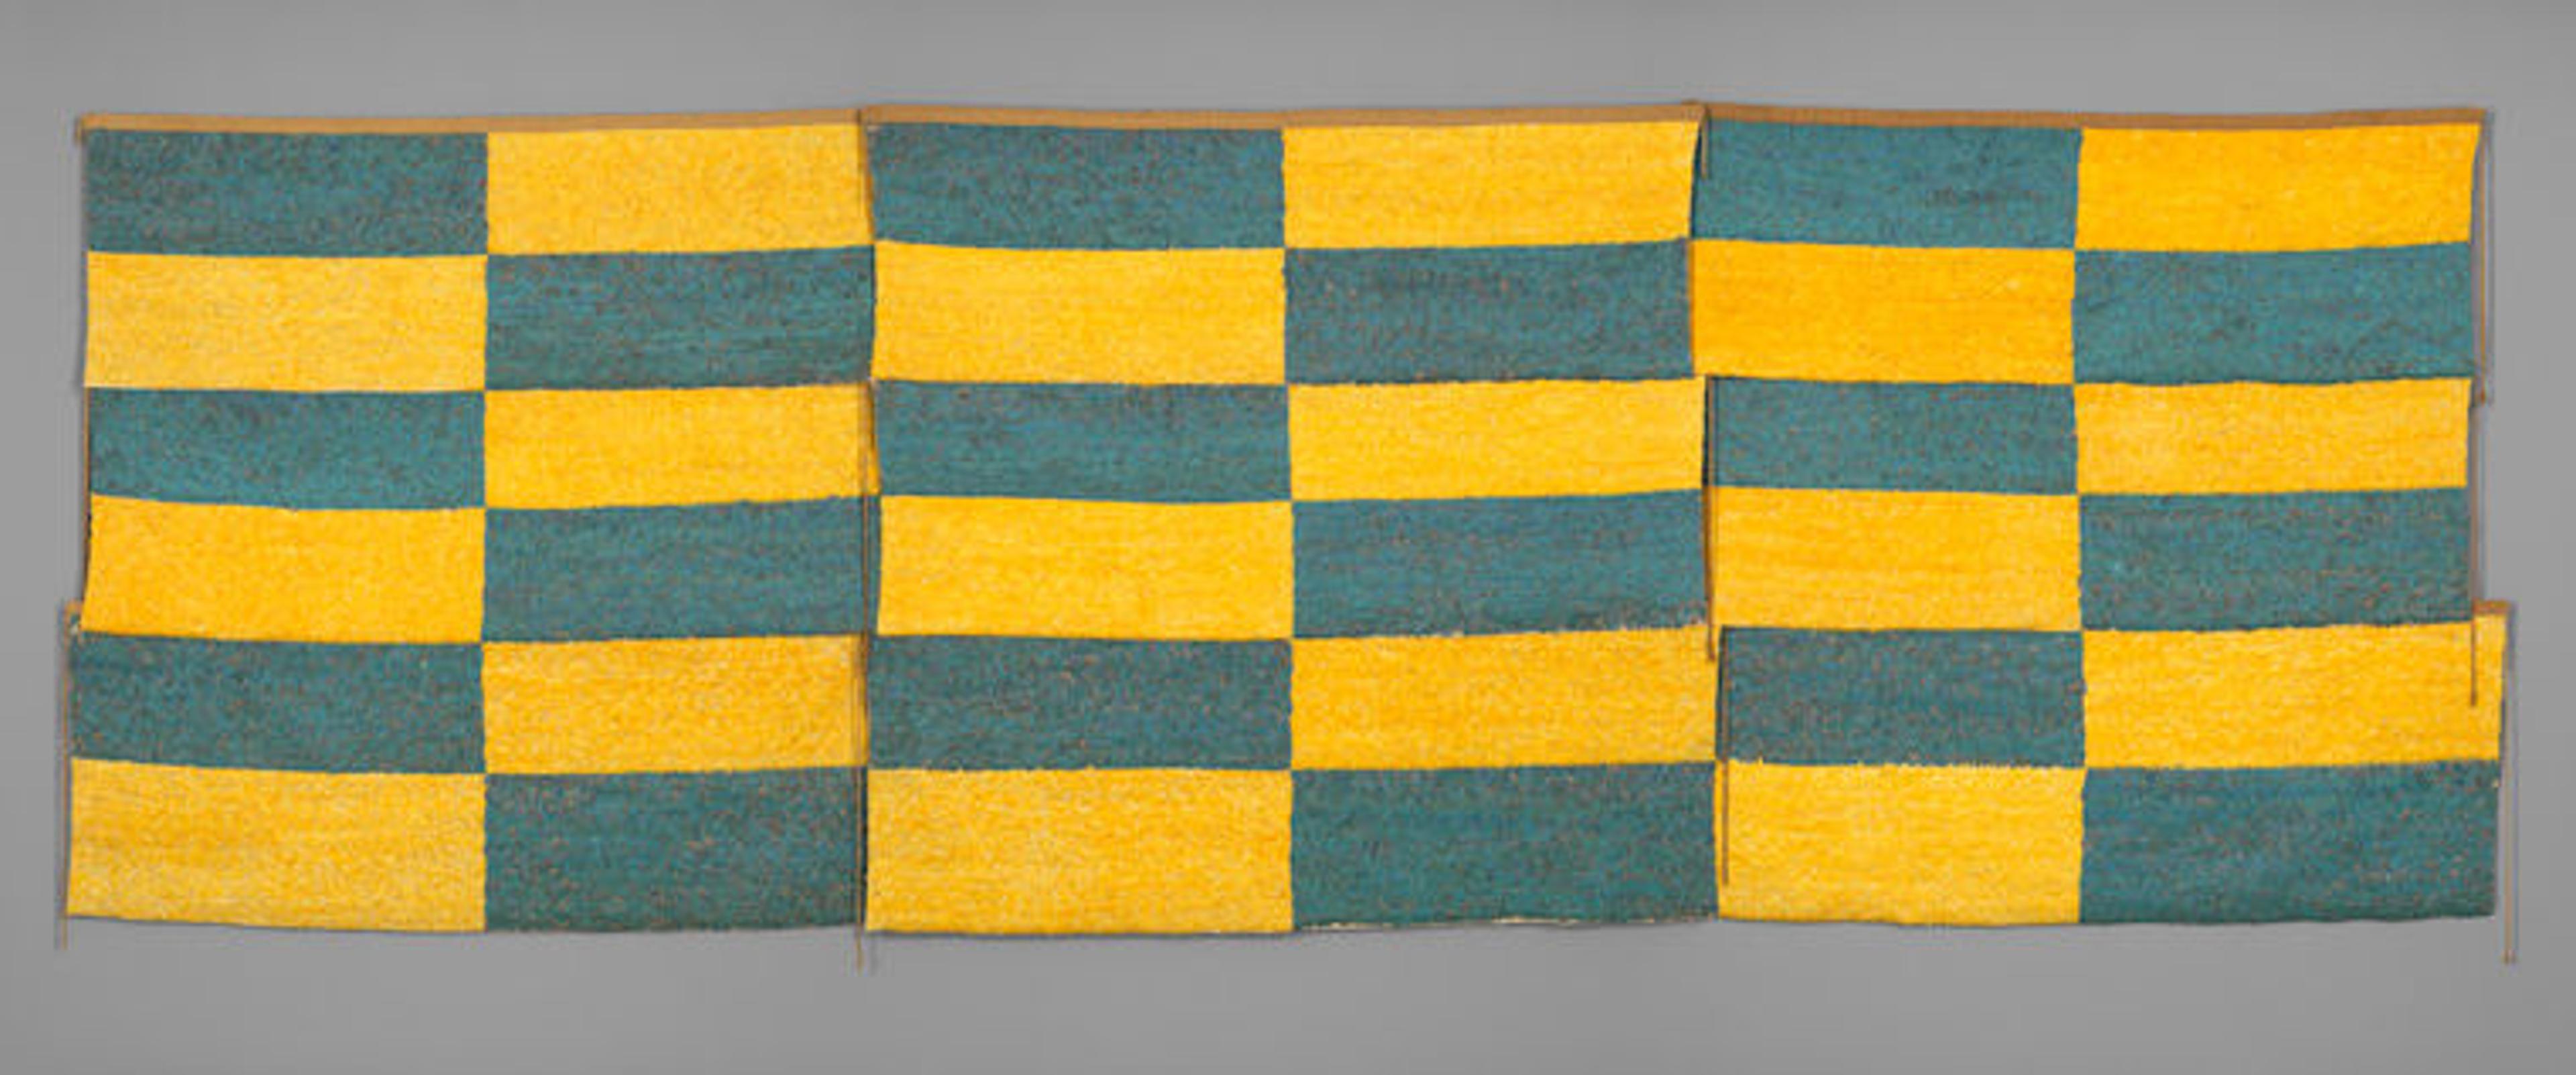 Peruvian featherwork panel made of blue and yellow feathers